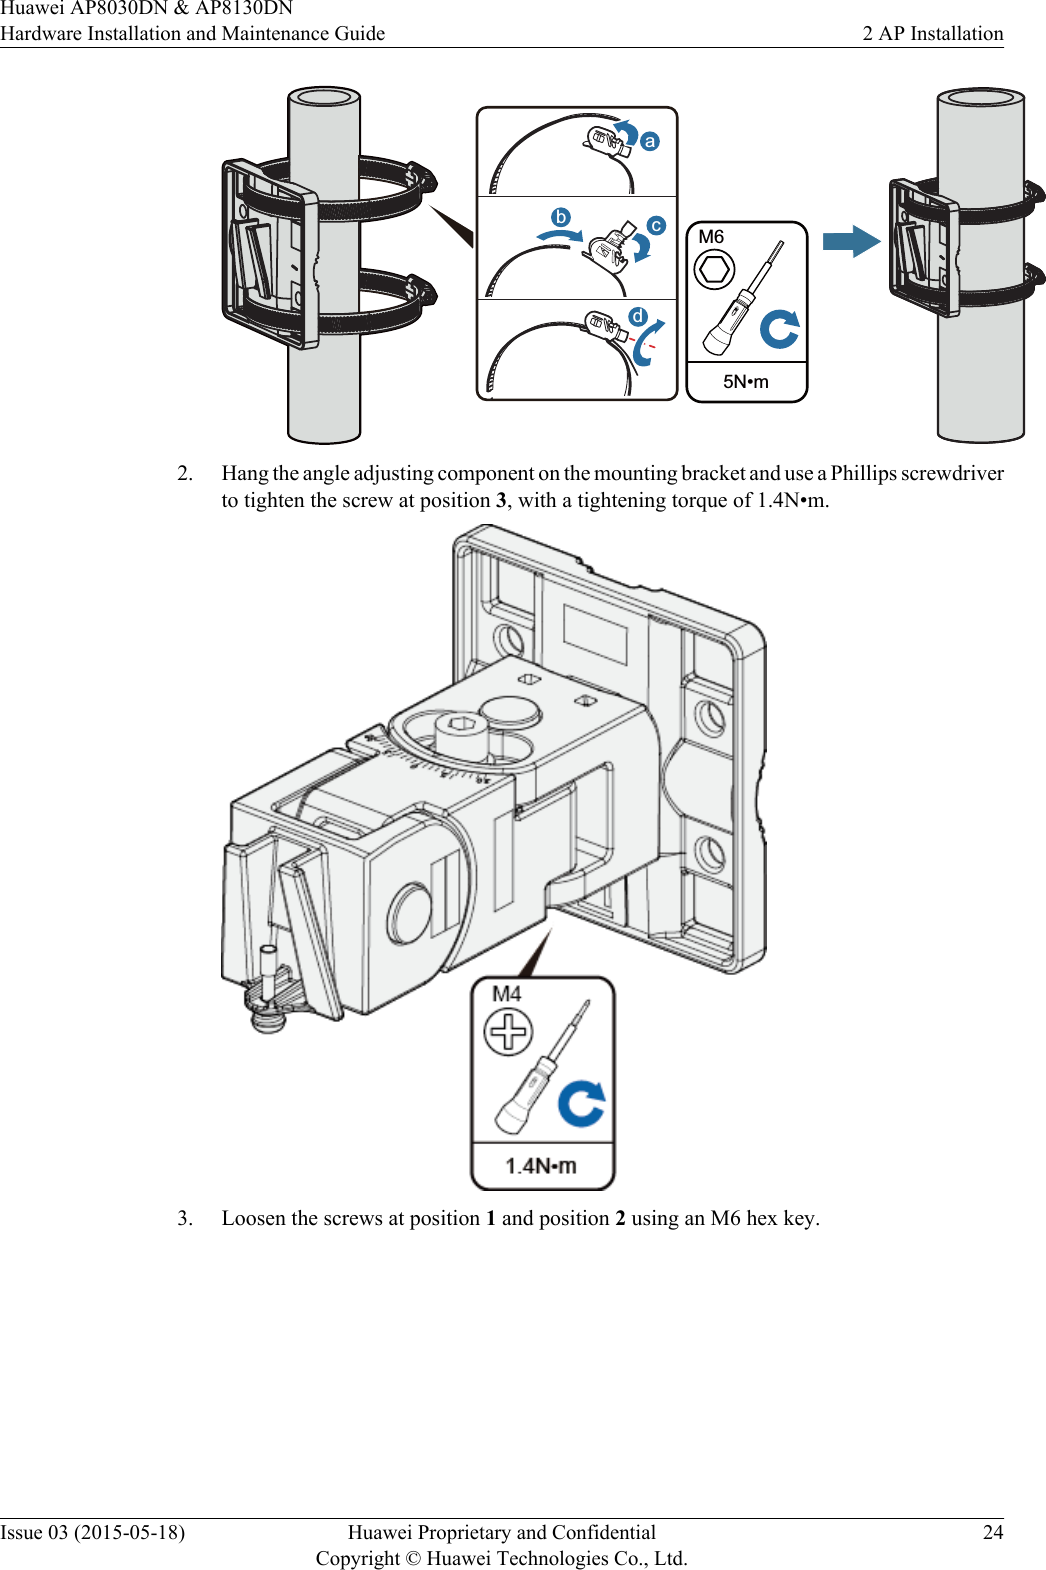  5N•mM6abcd2. Hang the angle adjusting component on the mounting bracket and use a Phillips screwdriverto tighten the screw at position 3, with a tightening torque of 1.4N•m.3. Loosen the screws at position 1 and position 2 using an M6 hex key.Huawei AP8030DN &amp; AP8130DNHardware Installation and Maintenance Guide 2 AP InstallationIssue 03 (2015-05-18) Huawei Proprietary and ConfidentialCopyright © Huawei Technologies Co., Ltd.24